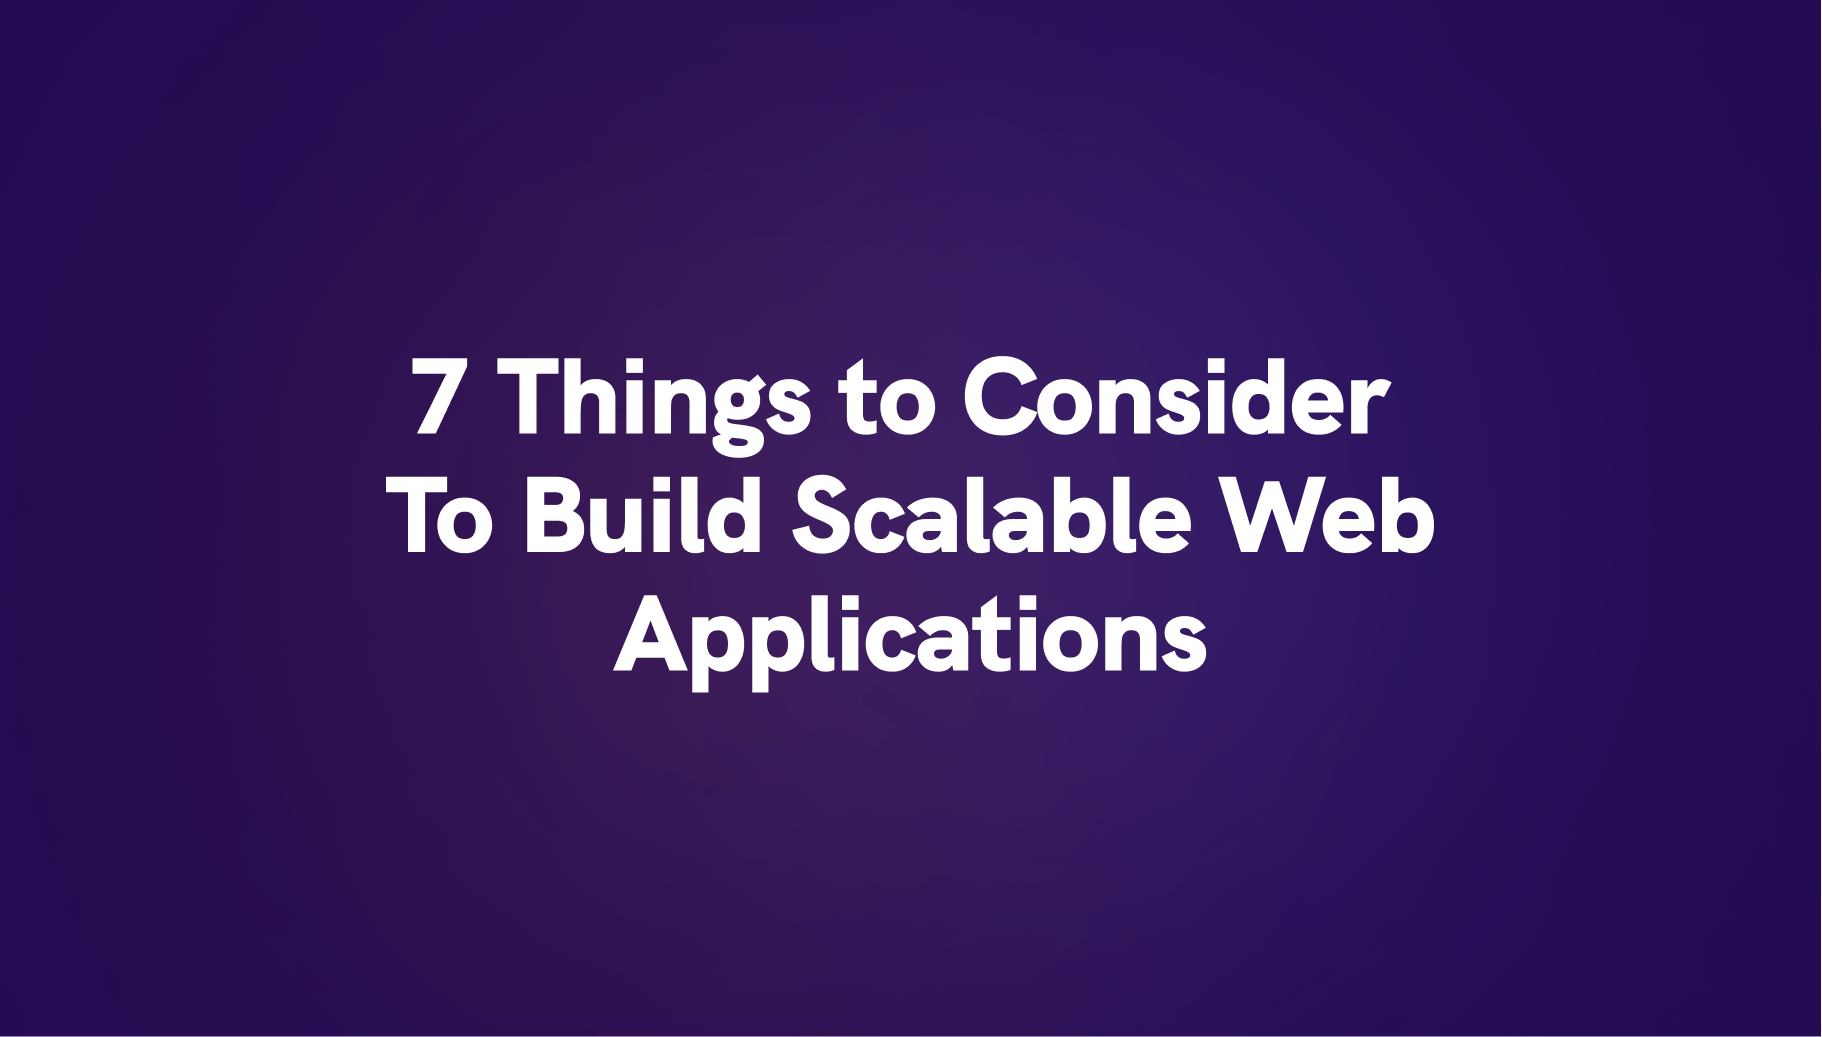 7 Things to Consider To Build Scalable Web Applications - Qovery